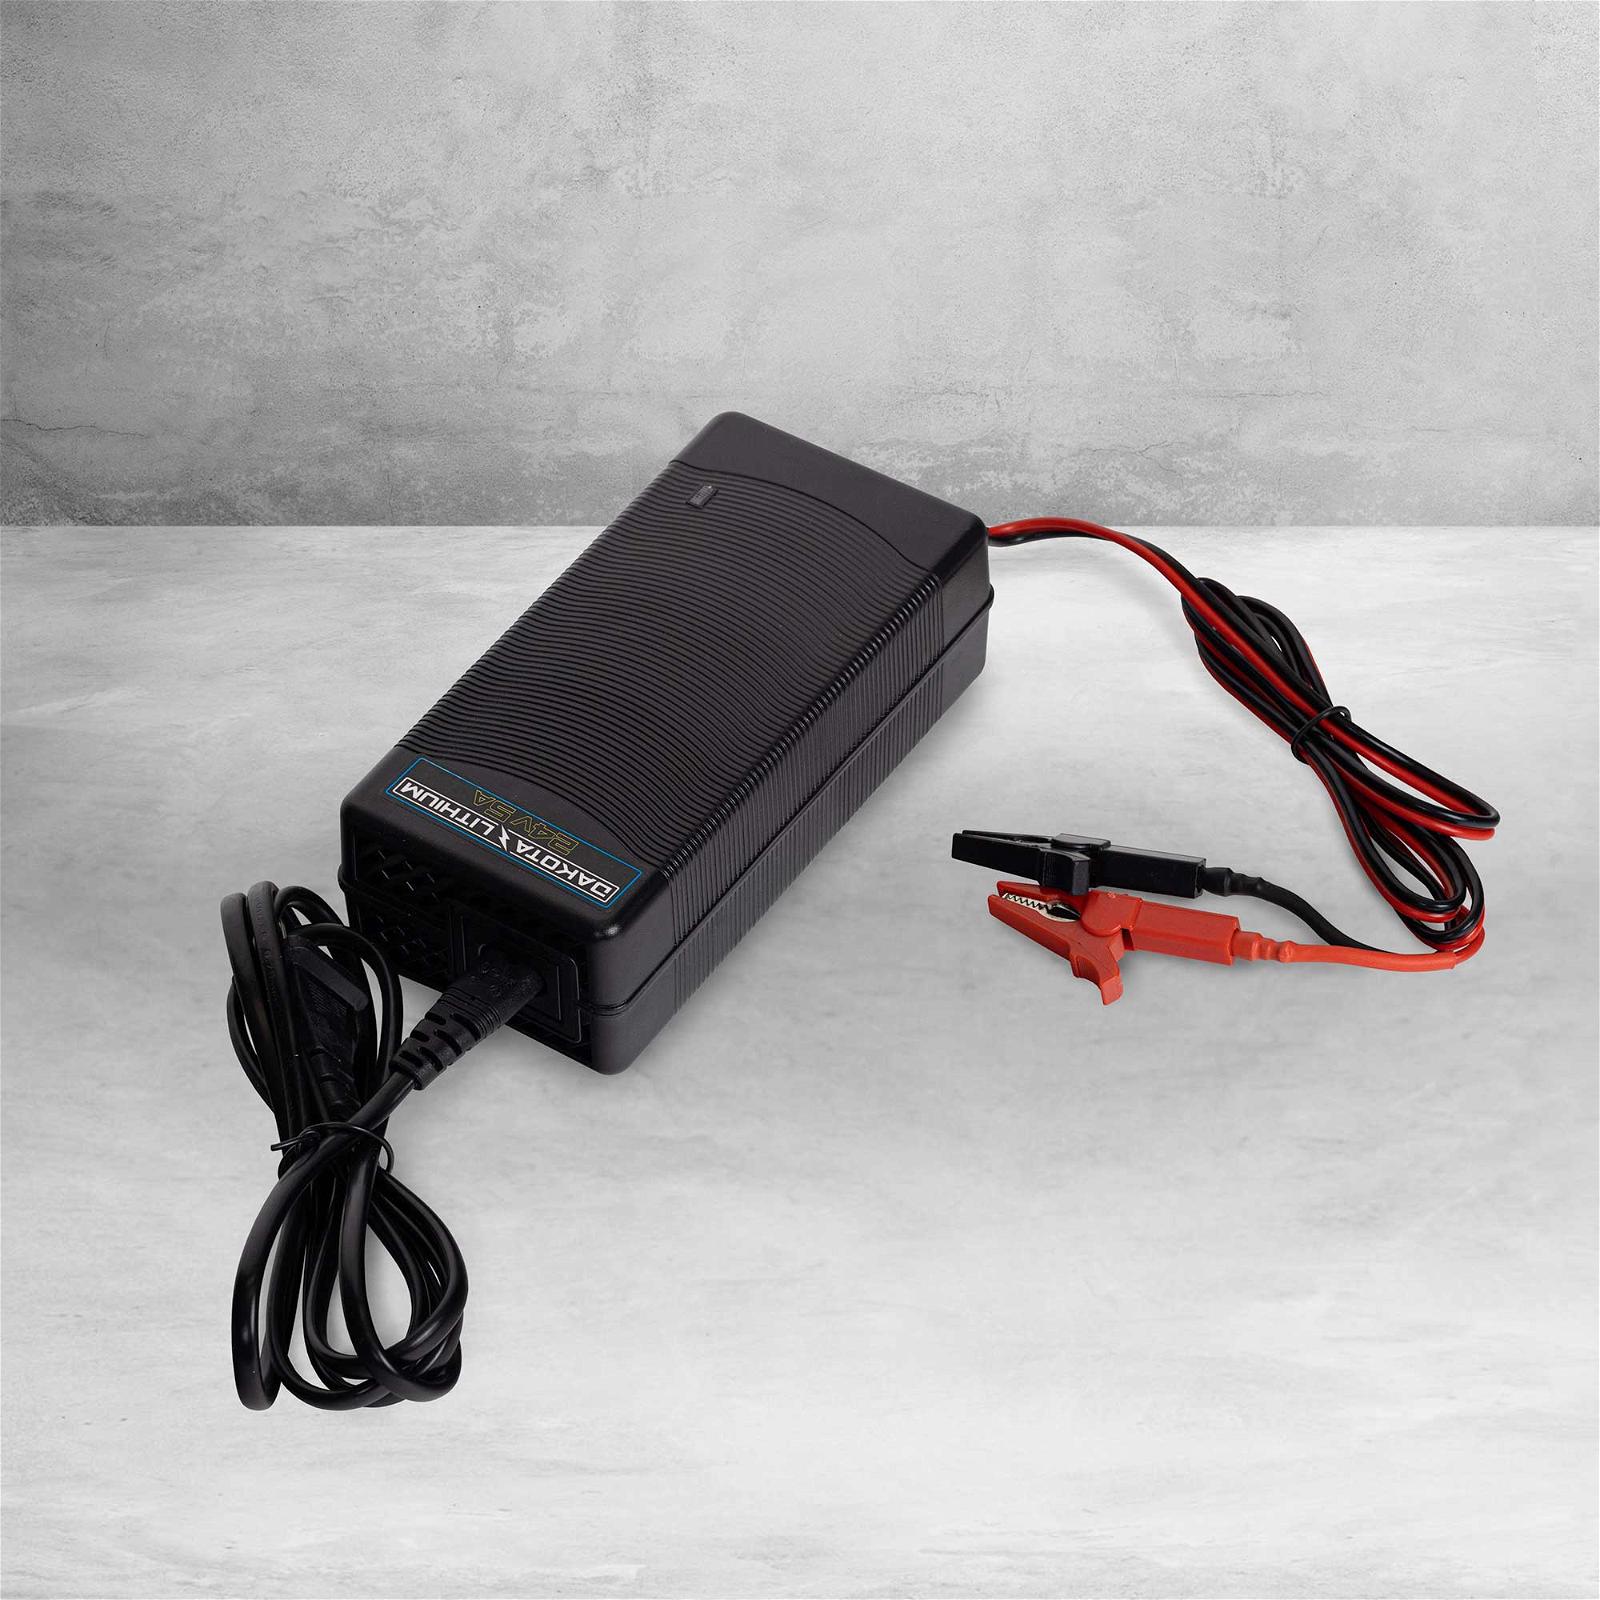 I-Tech TruckLoad Power Bank - Large Capacity Outdoor